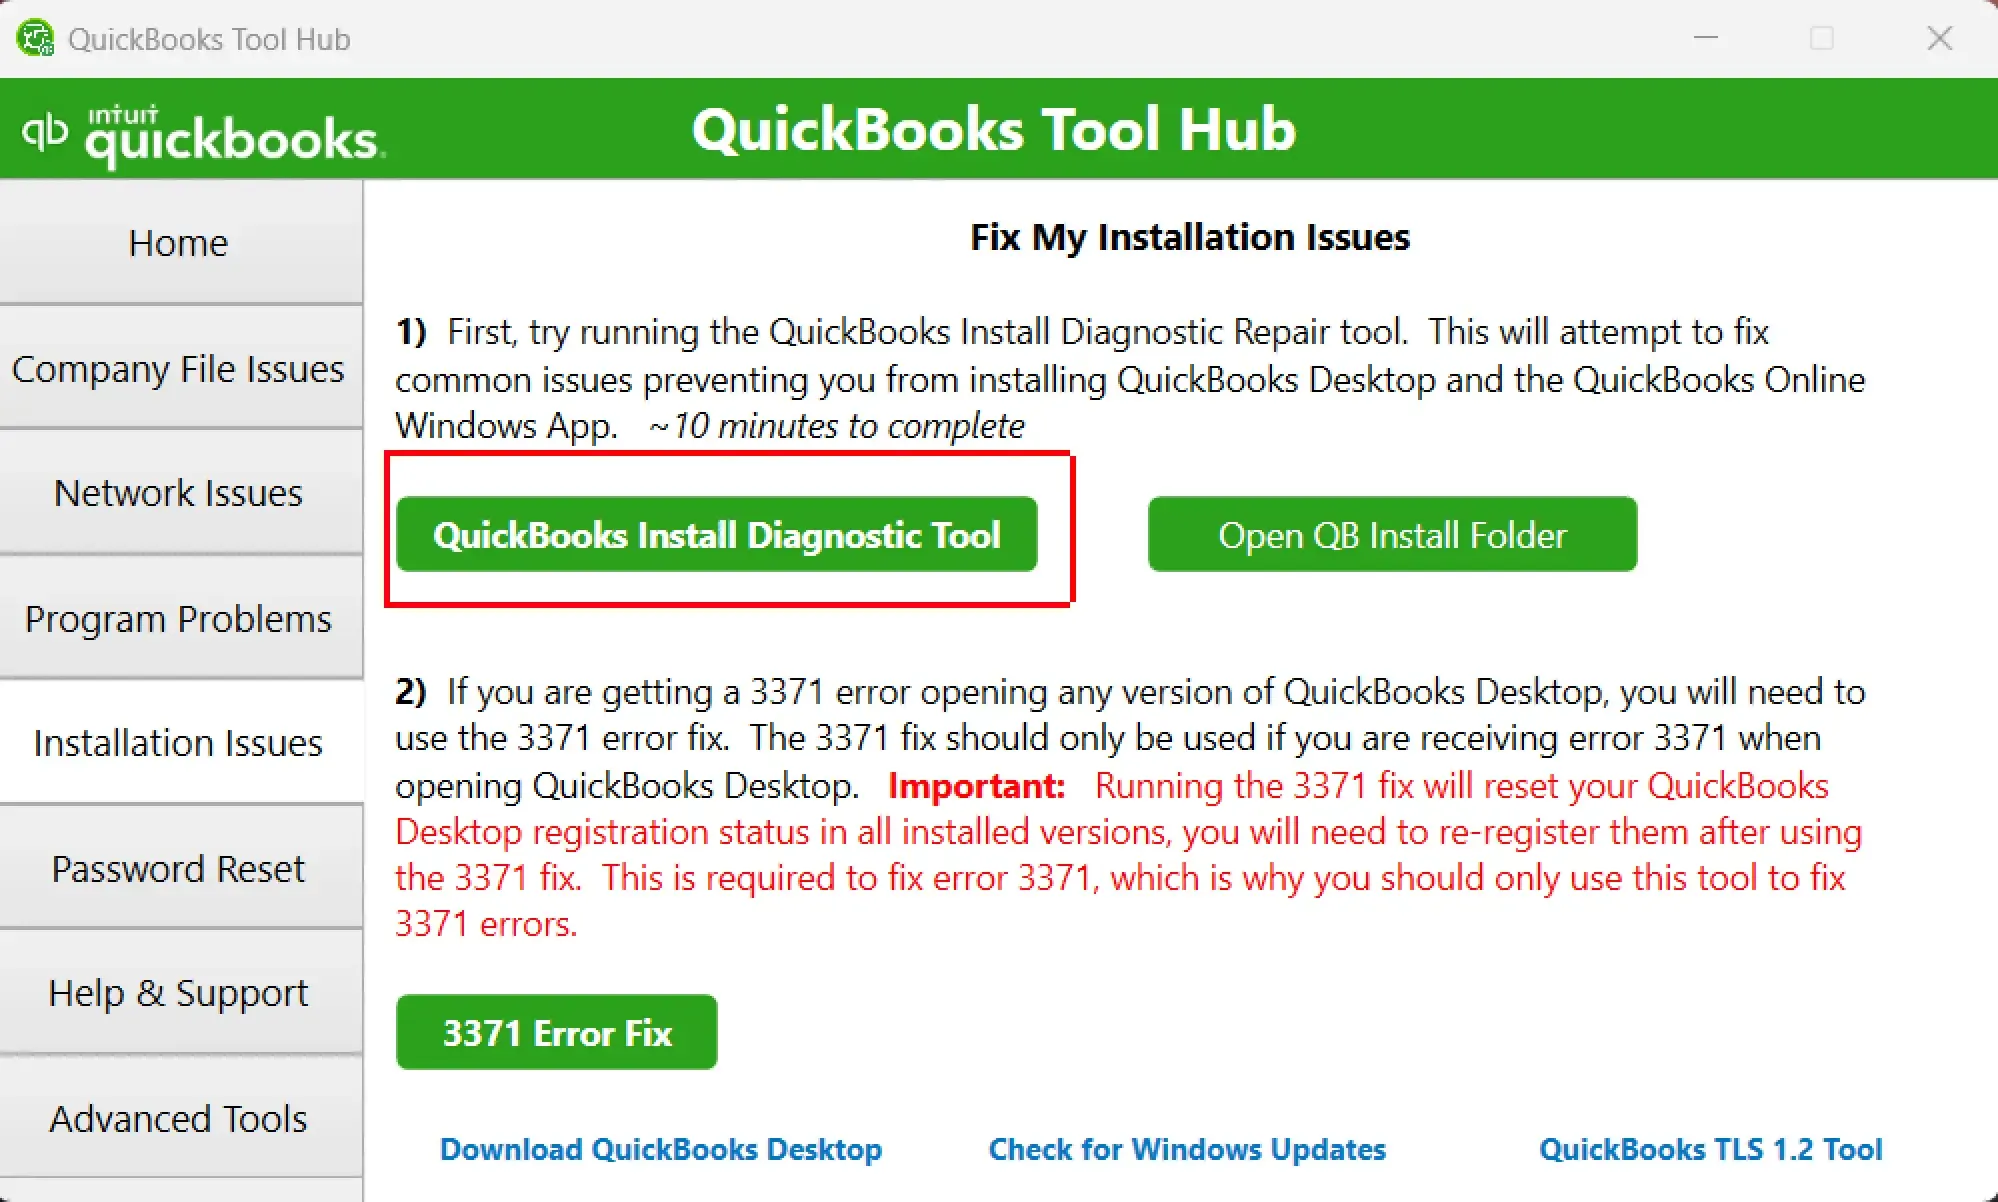 downloading quickbooks install diagnostic tool to troubleshoot quickbooks connection issues